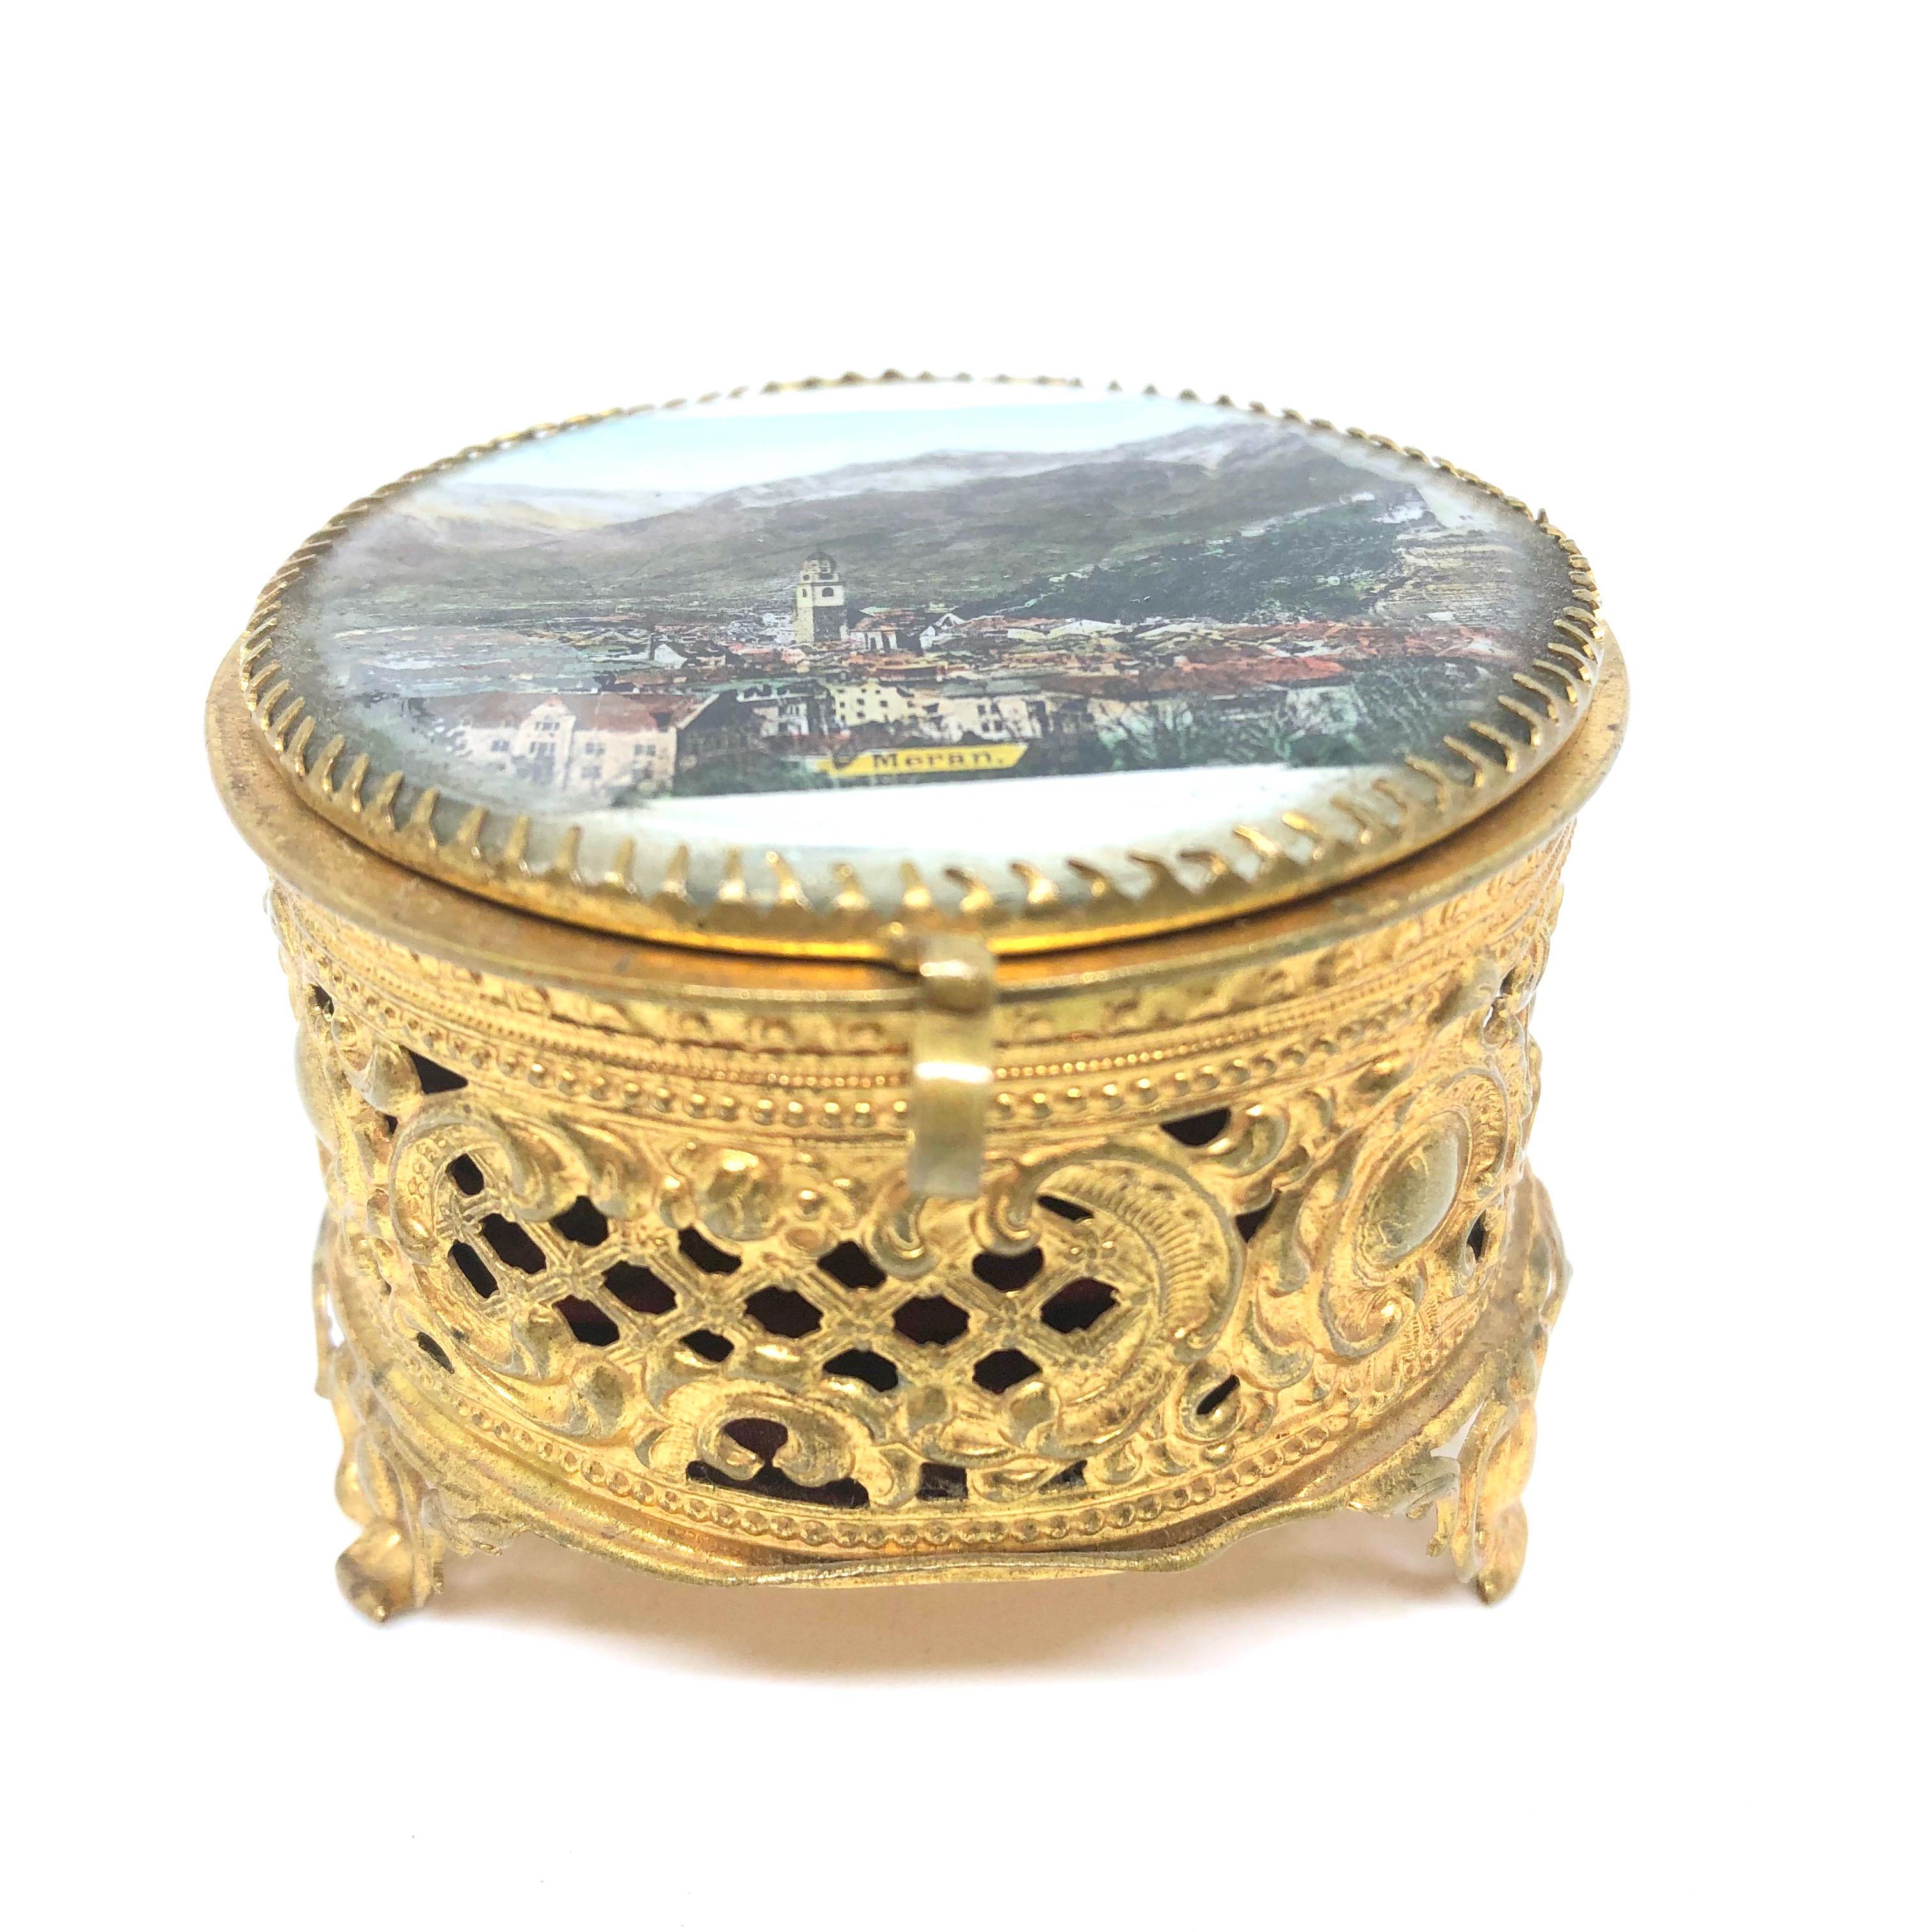 A gorgeous glass top trinket box made of ormolu. The hinged top featuring a City view of Meran. No restoration has been carried out on this charming little trinket box, which remains in very stabile and functioning condition, wear is consistent with